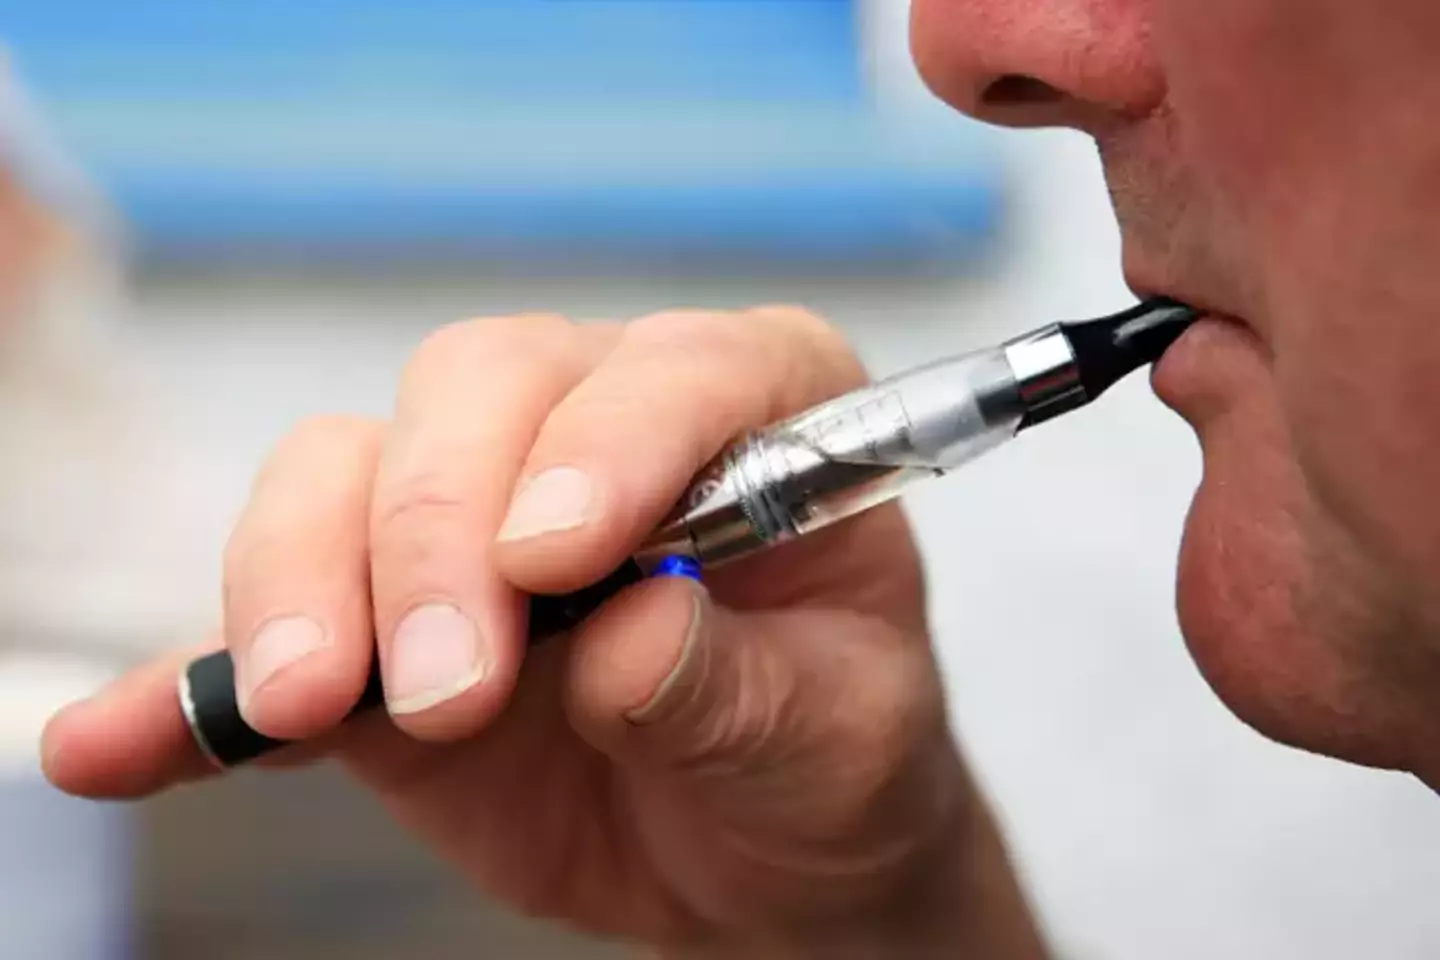 Mint flavoured vapes could be very dangerous to your health.